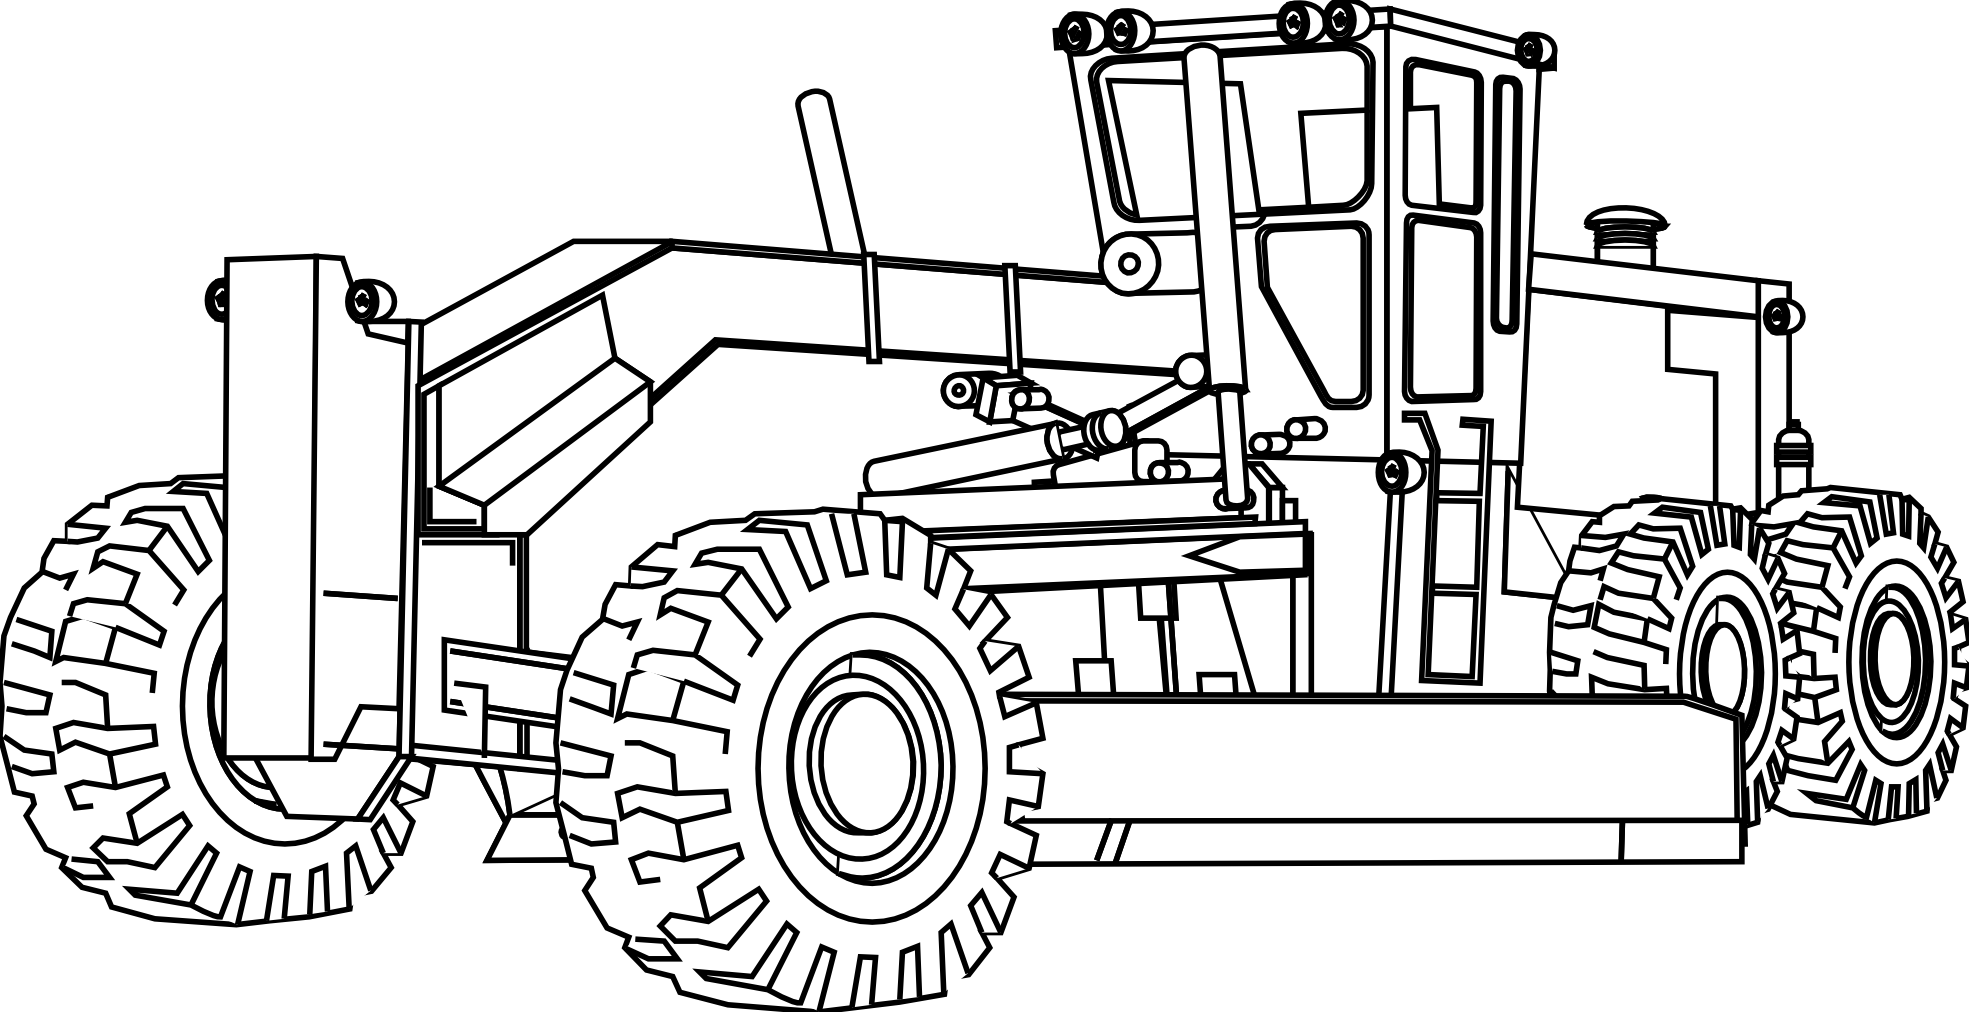 9 Pics Of Free Construction Equipment Coloring Pages - Printable